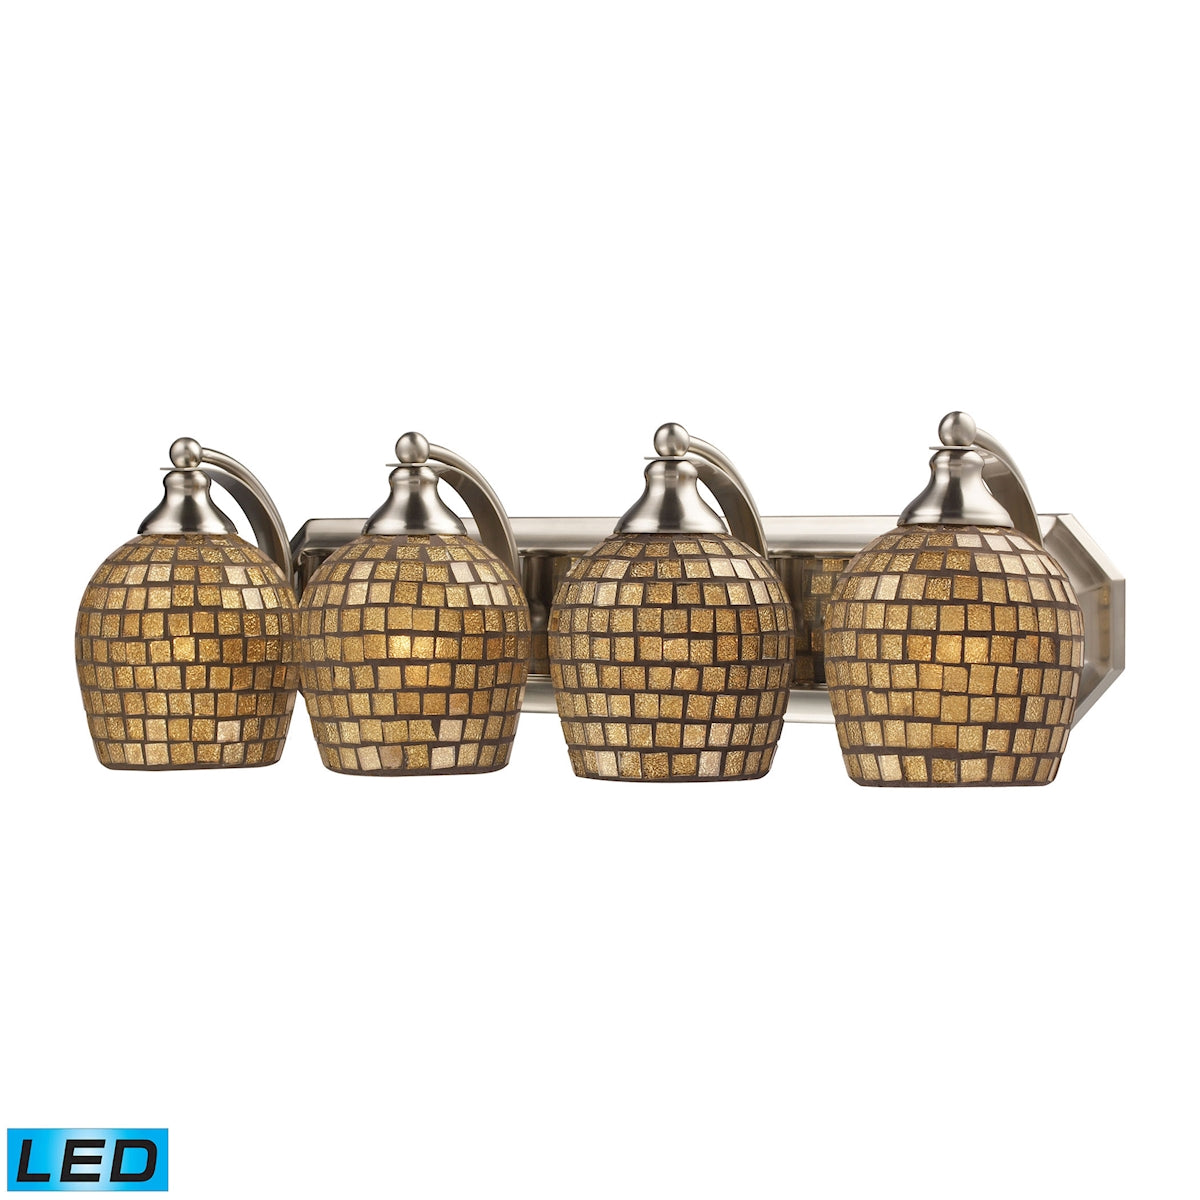 Mix-N-Match Vanity 4-Light Wall Lamp in Satin Nickel with Gold Leaf Glass - Includes LED Bulbs